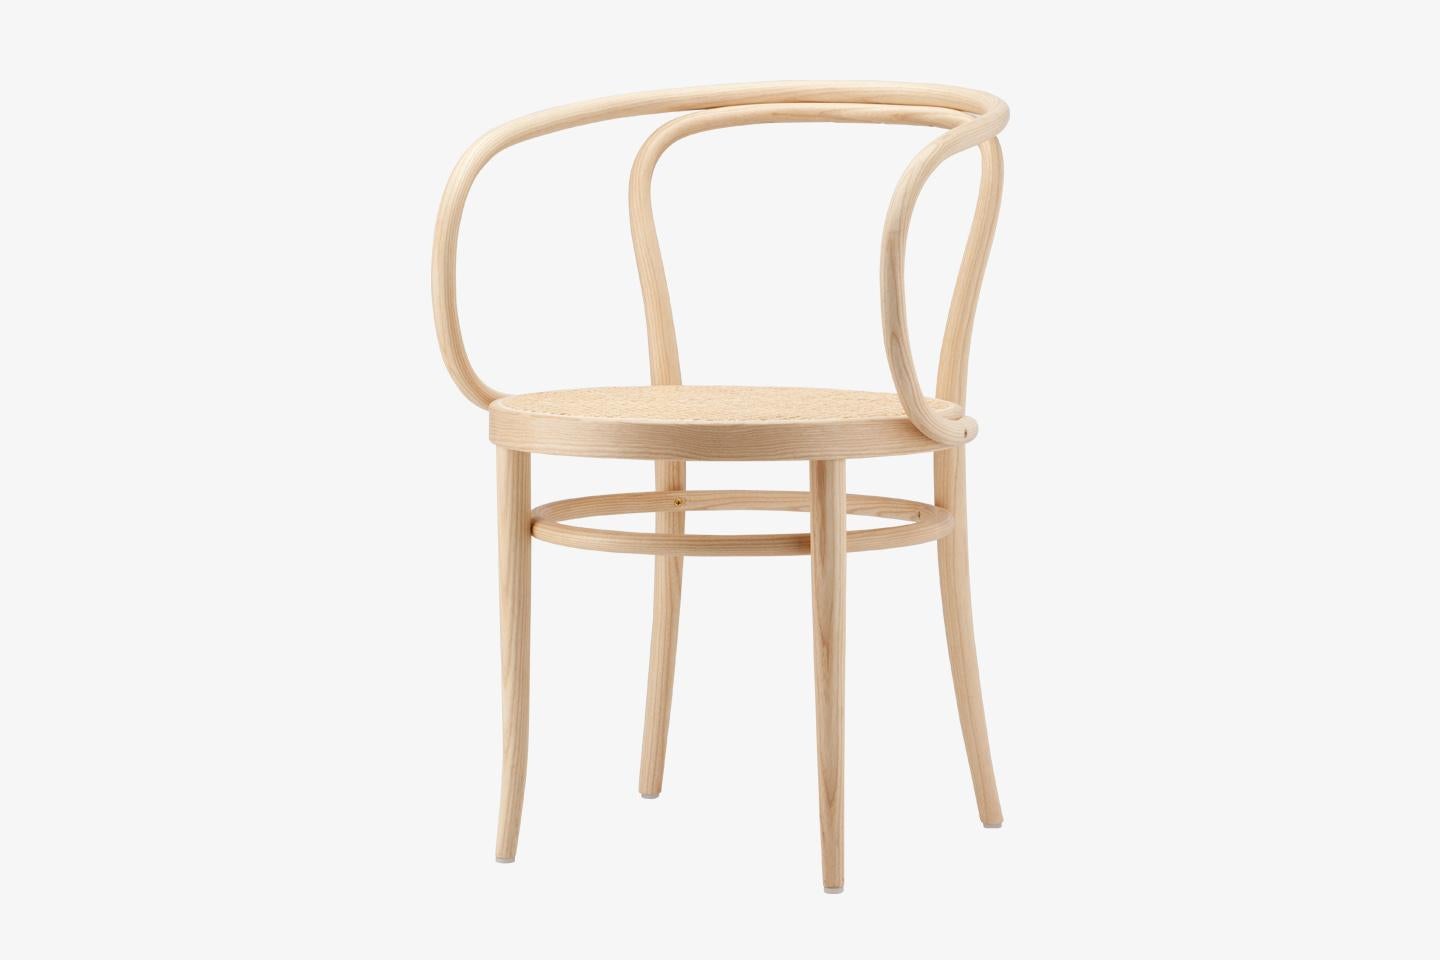 Customizable 210 R Bentwood Chair by Gebrüder T, 1819 For Sale 3